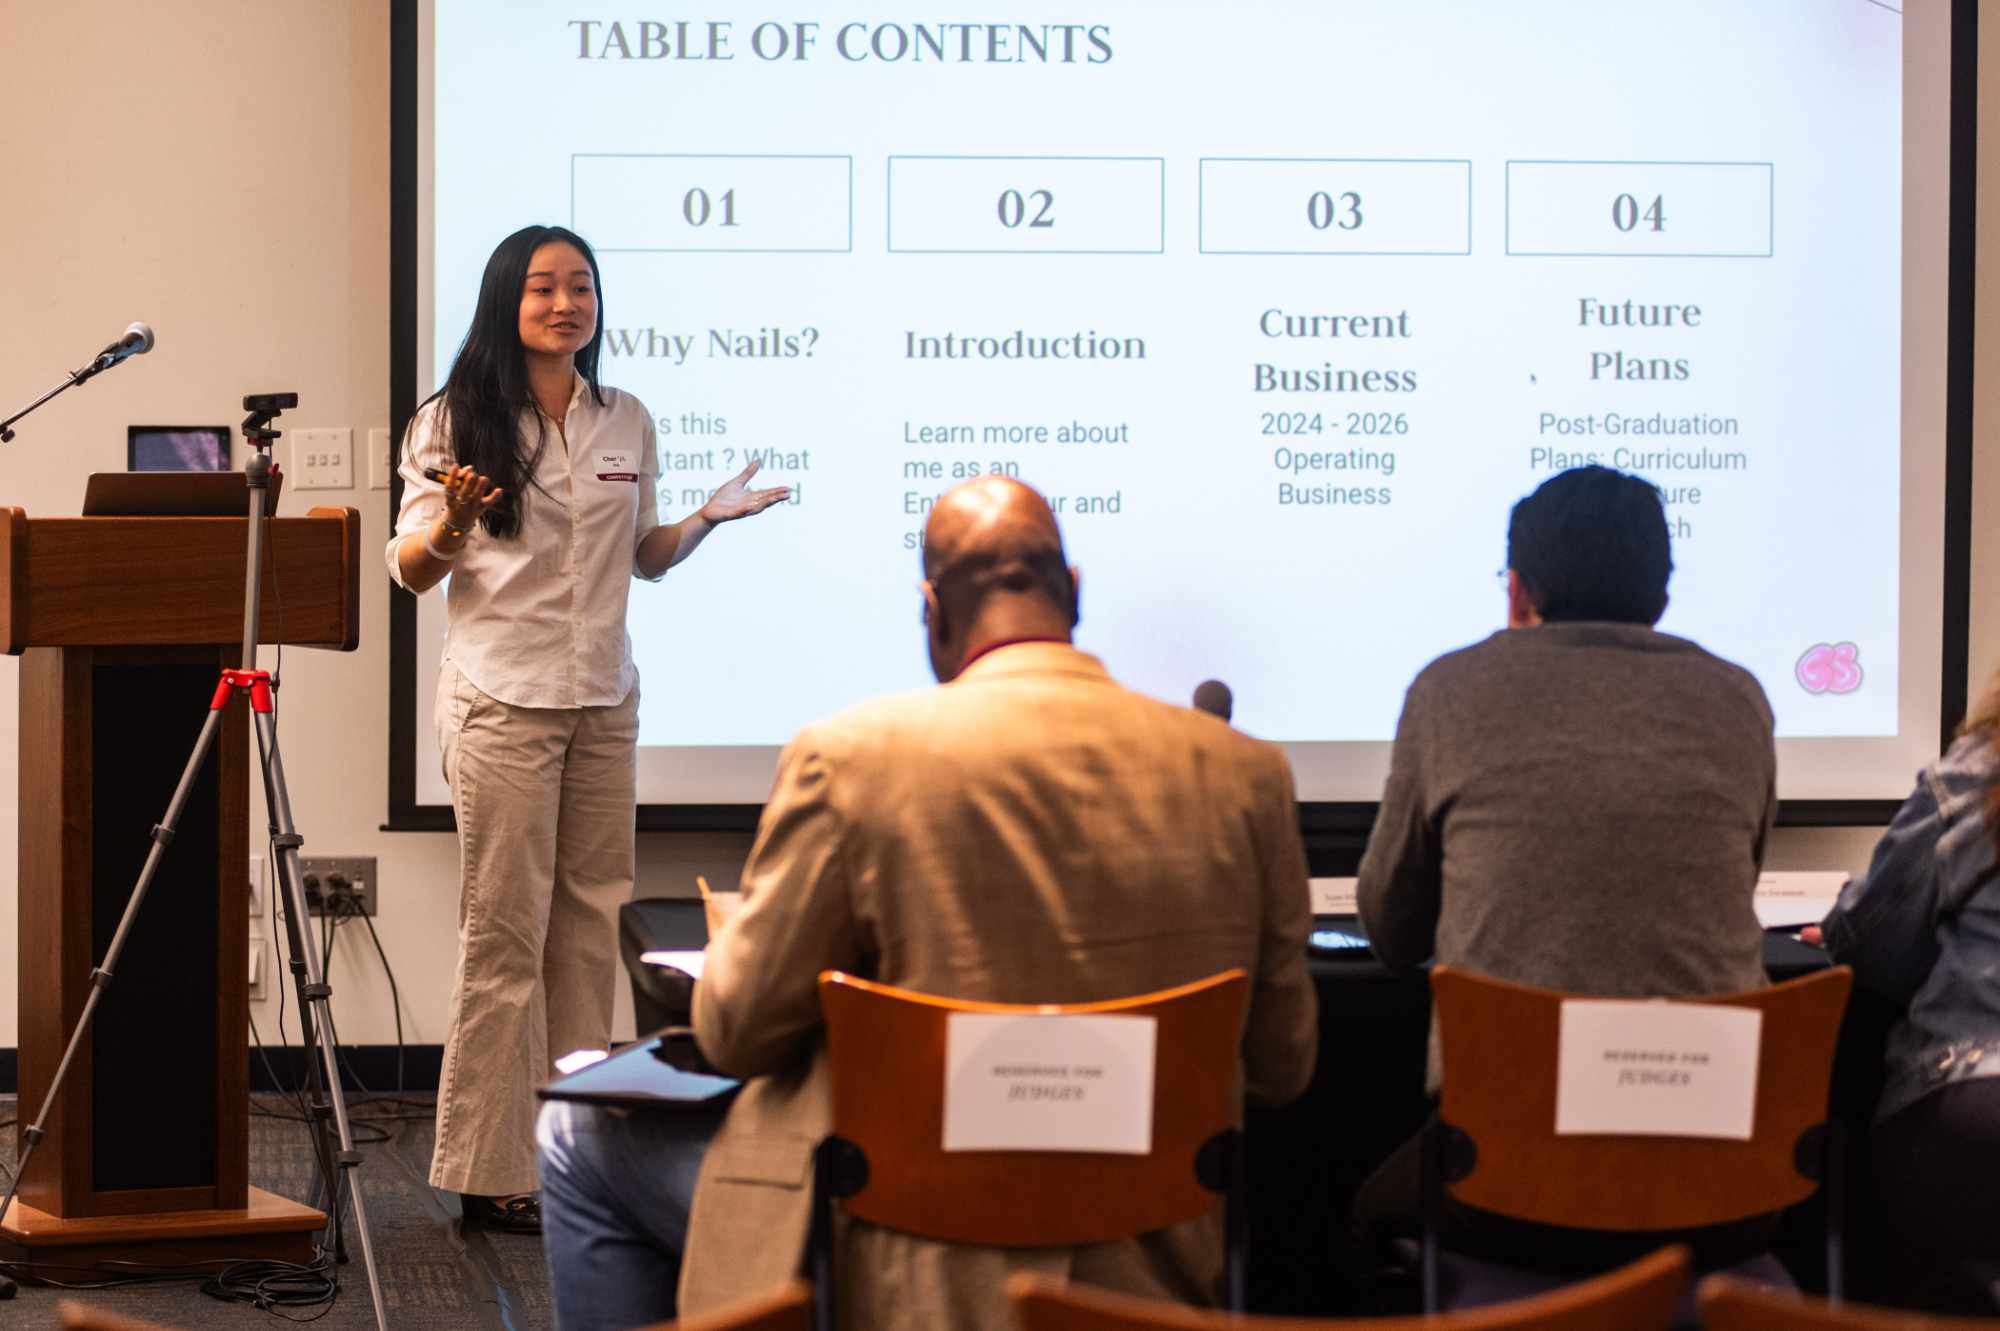 A person gives a presentation at the front of the room. Behind the person is a projected slide that reads “Table of Contents: Why Nails?; Introduction; Current Business; Future Plans”. Closest to the viewer are two people sitting in chairs, seen from the back.